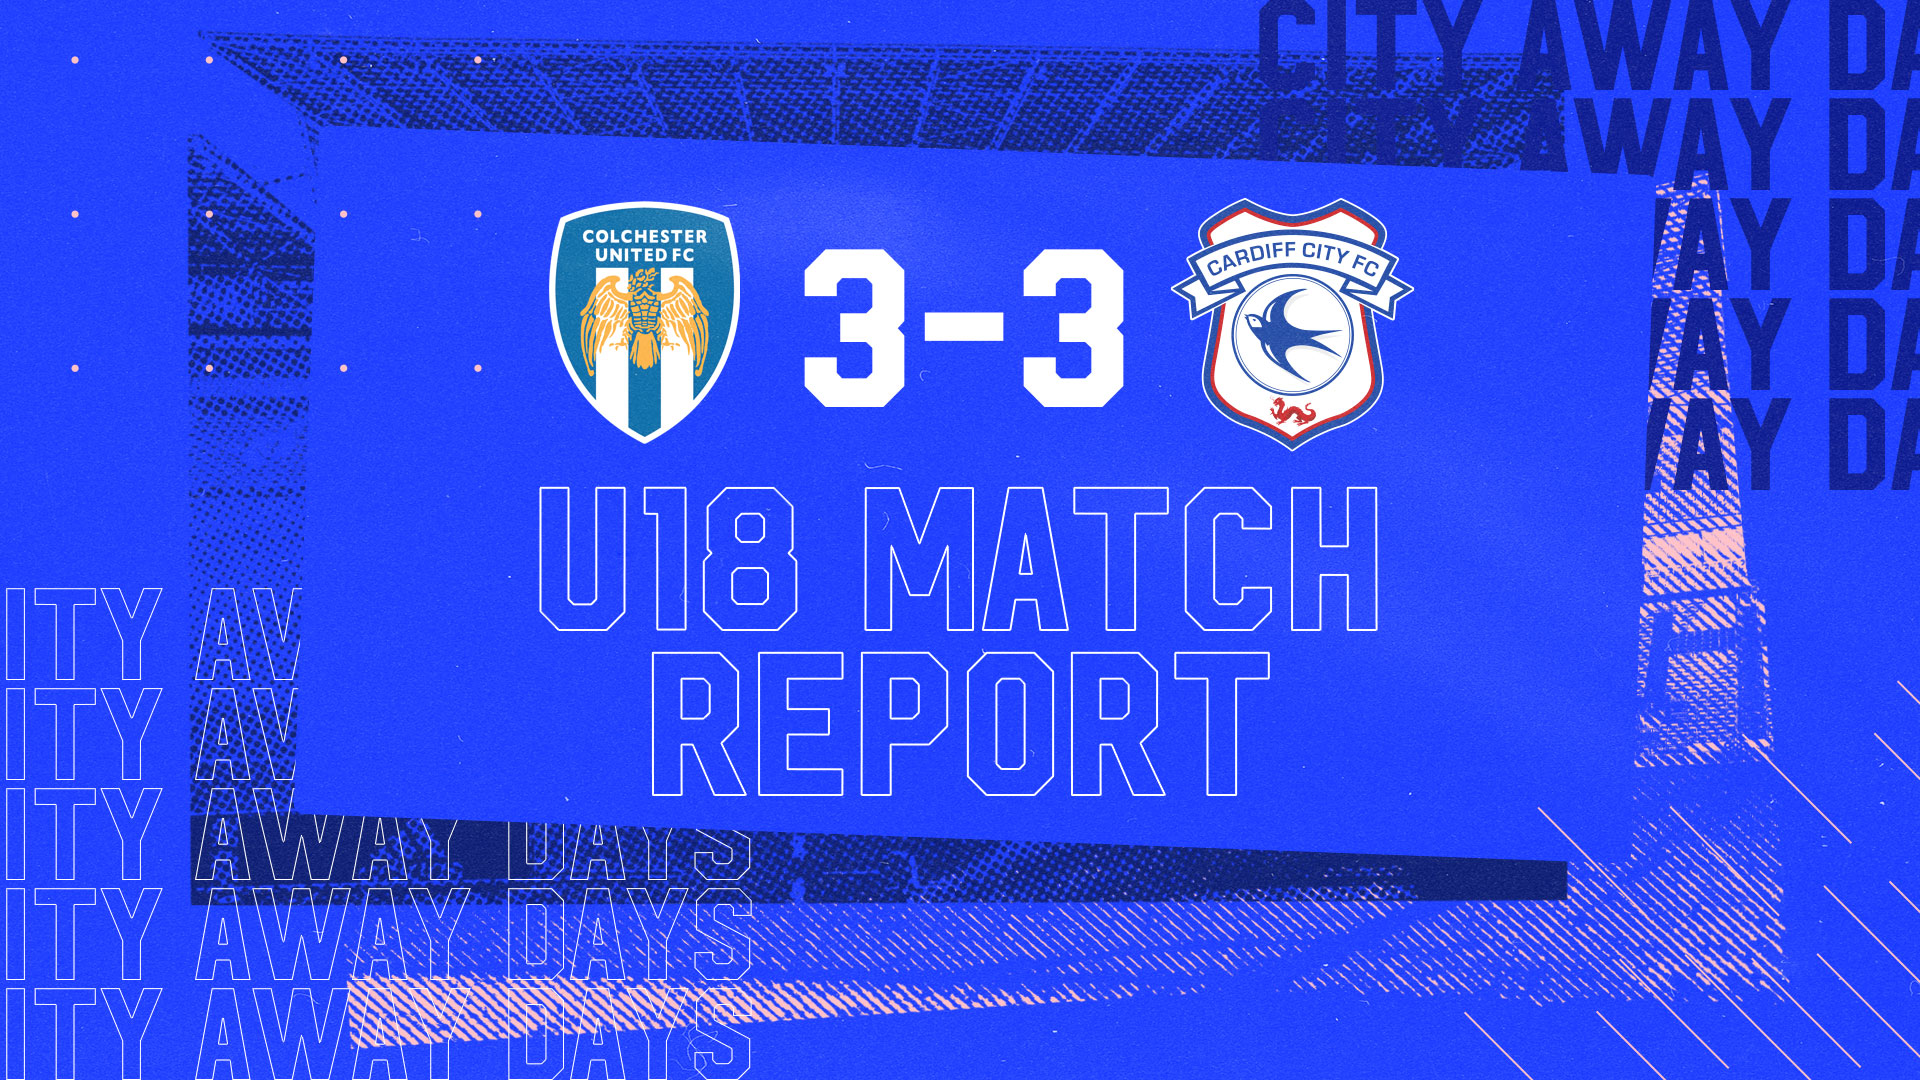 The Bluebirds drew 3-3 with Colchester...